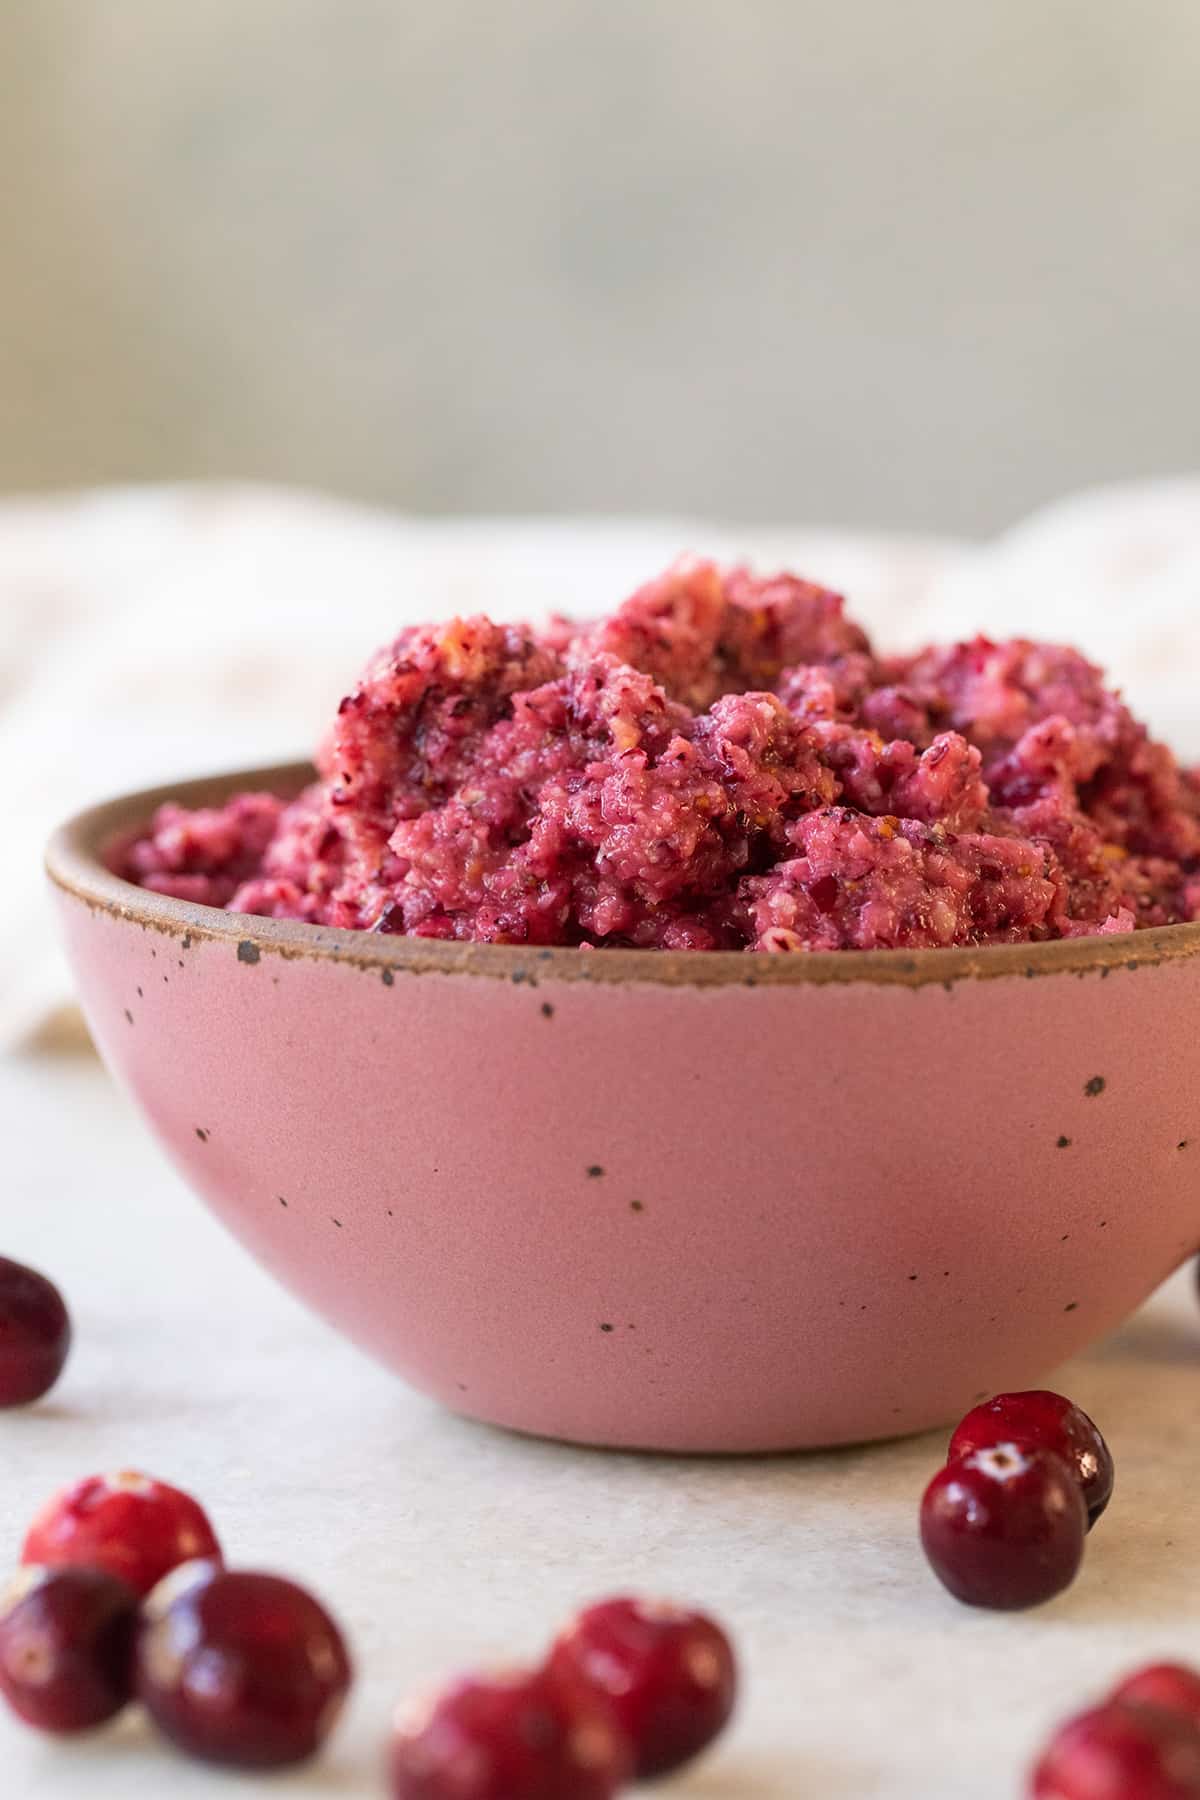 Cranberry orange relish in a pink bowl.